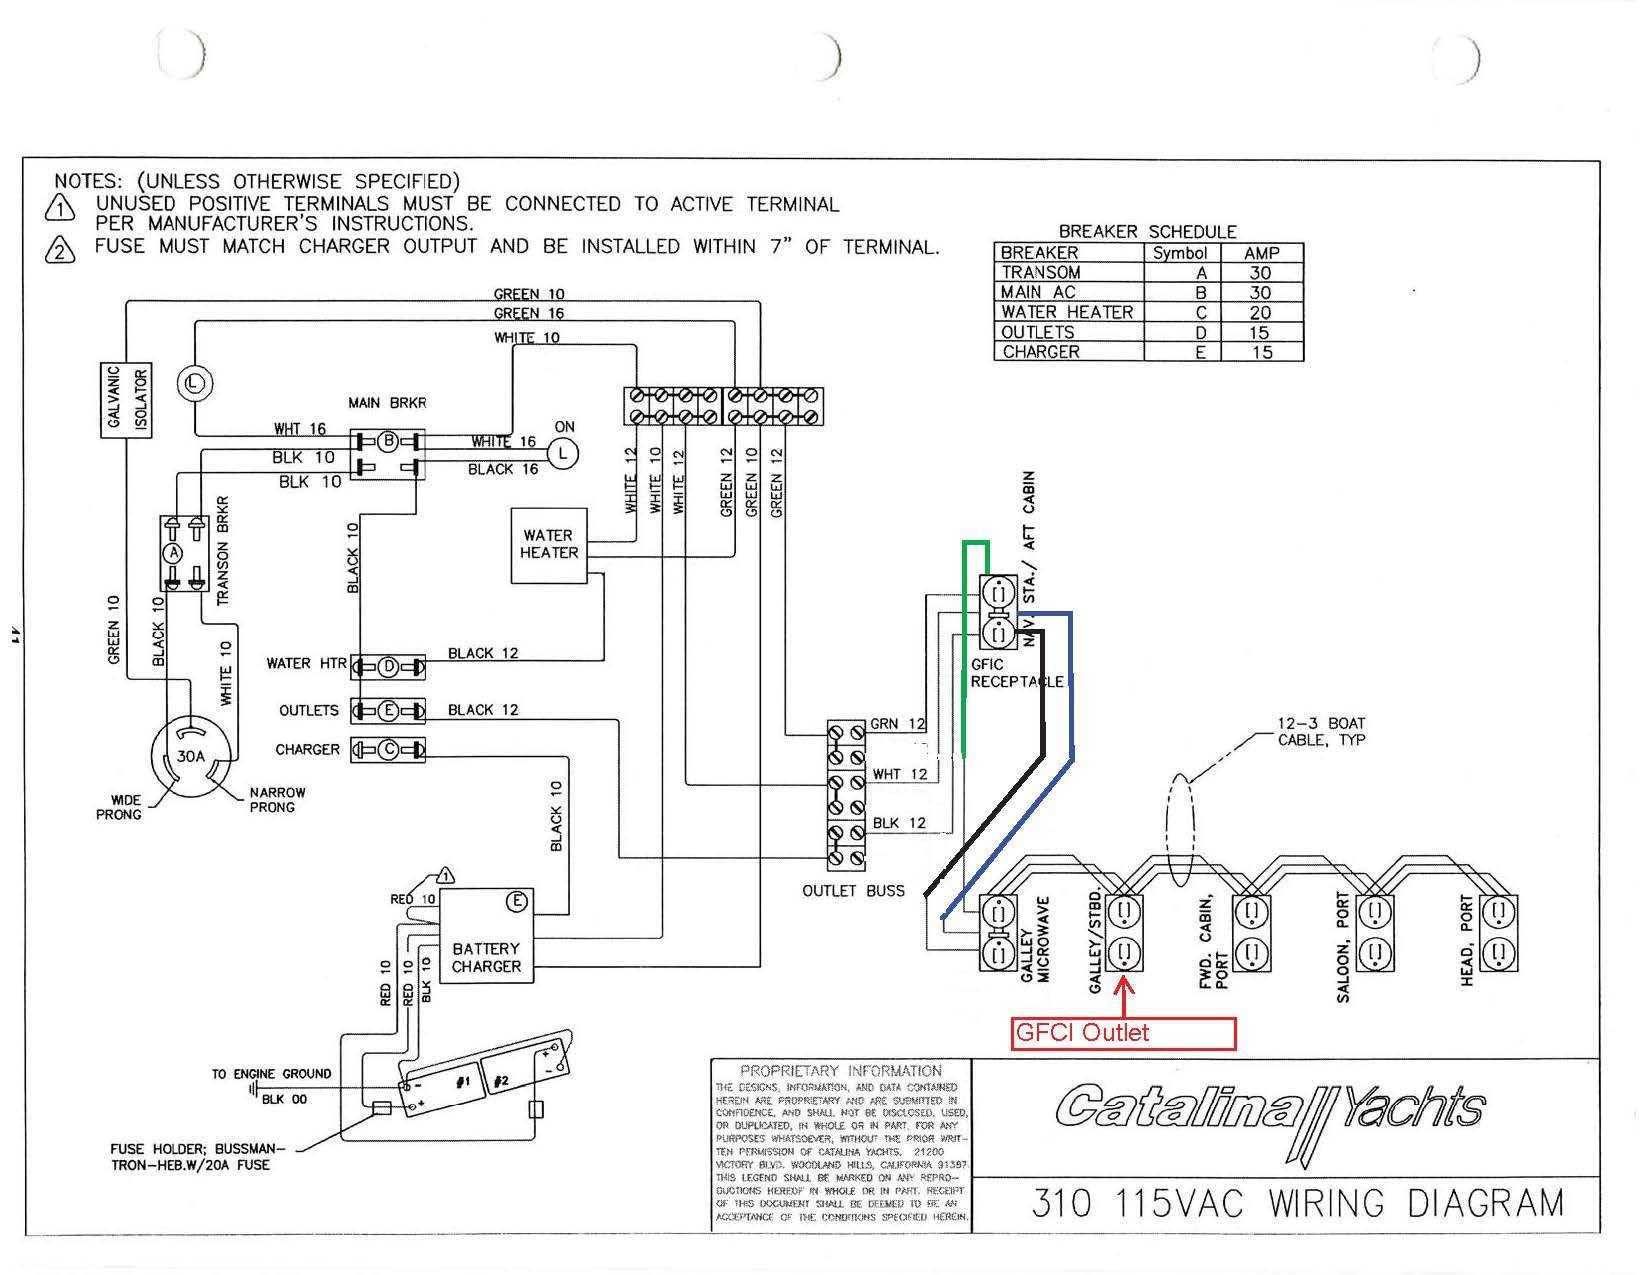 Amp Research Power Step Wiring Diagram Inspirational Shop Diagrams 2